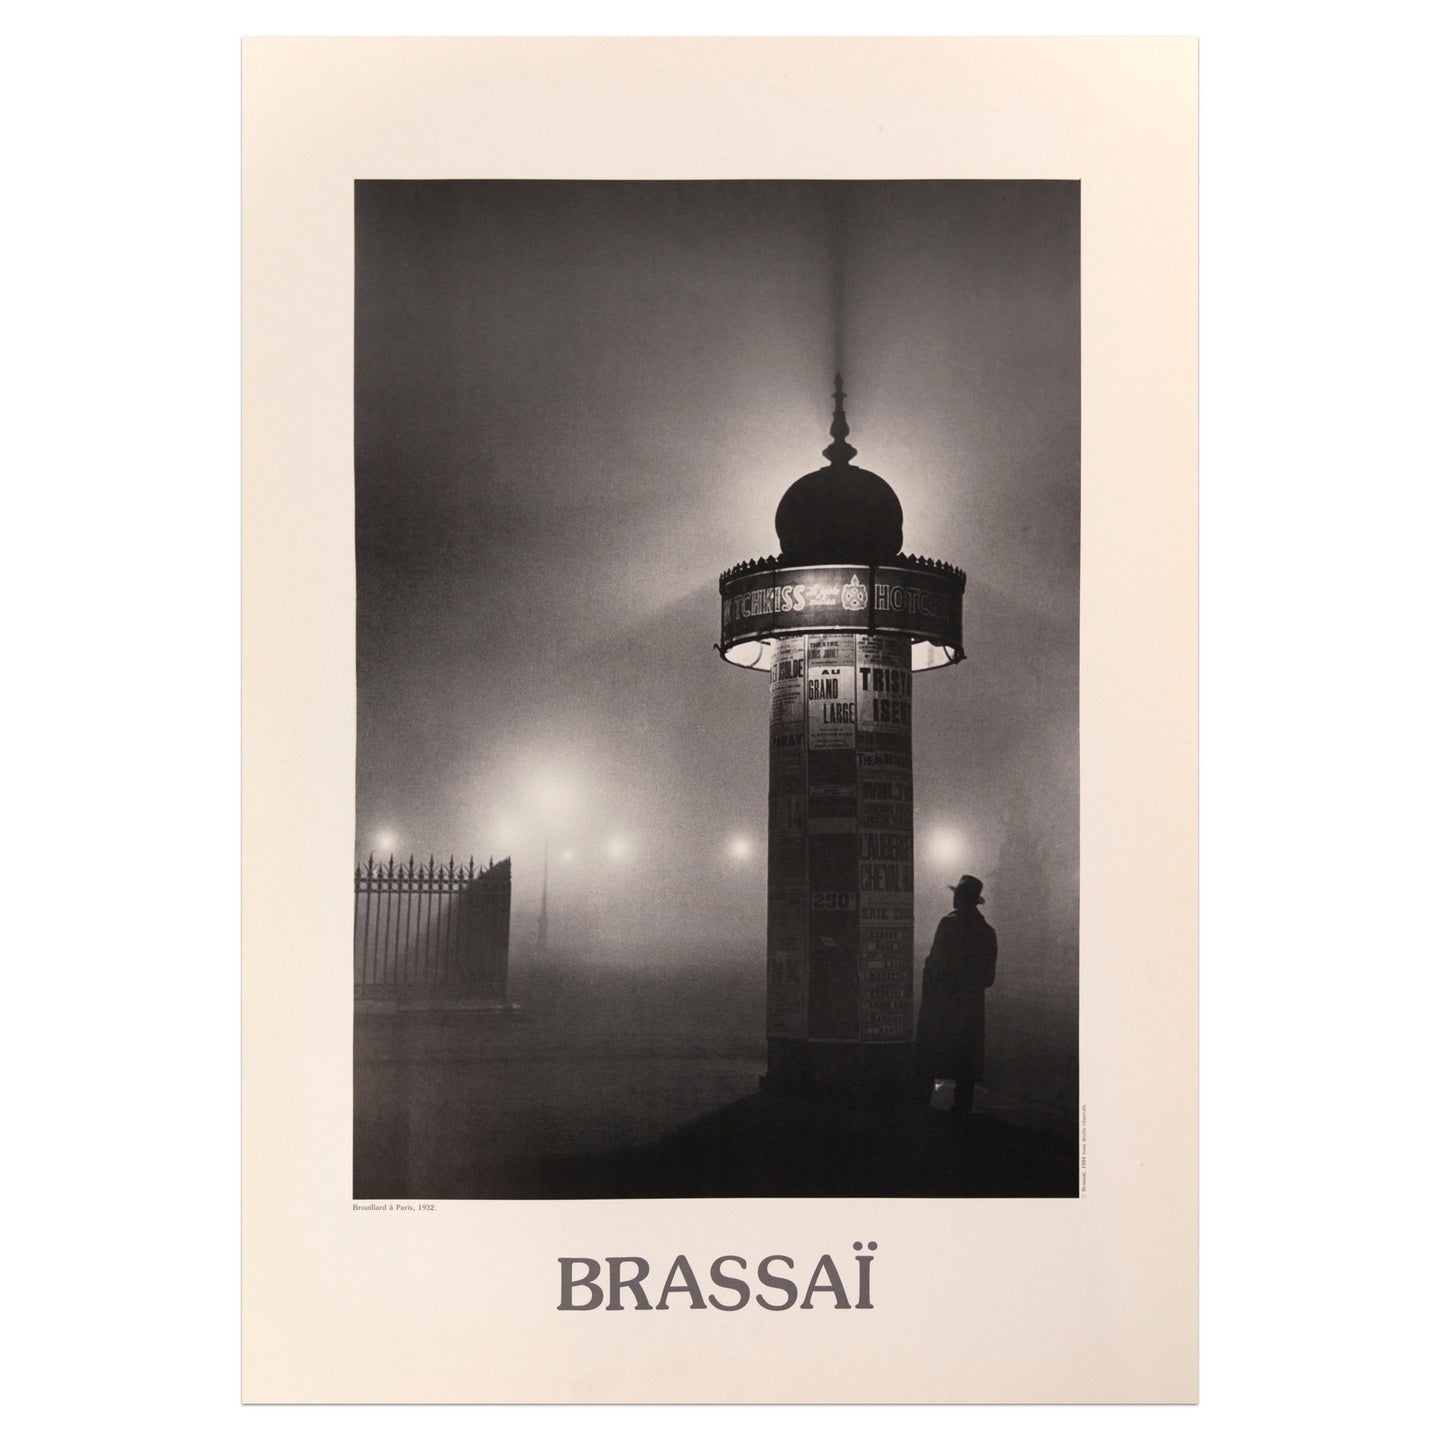 Brassaï poster featuring a black and white photograph of a man standing under a light in a foggy night